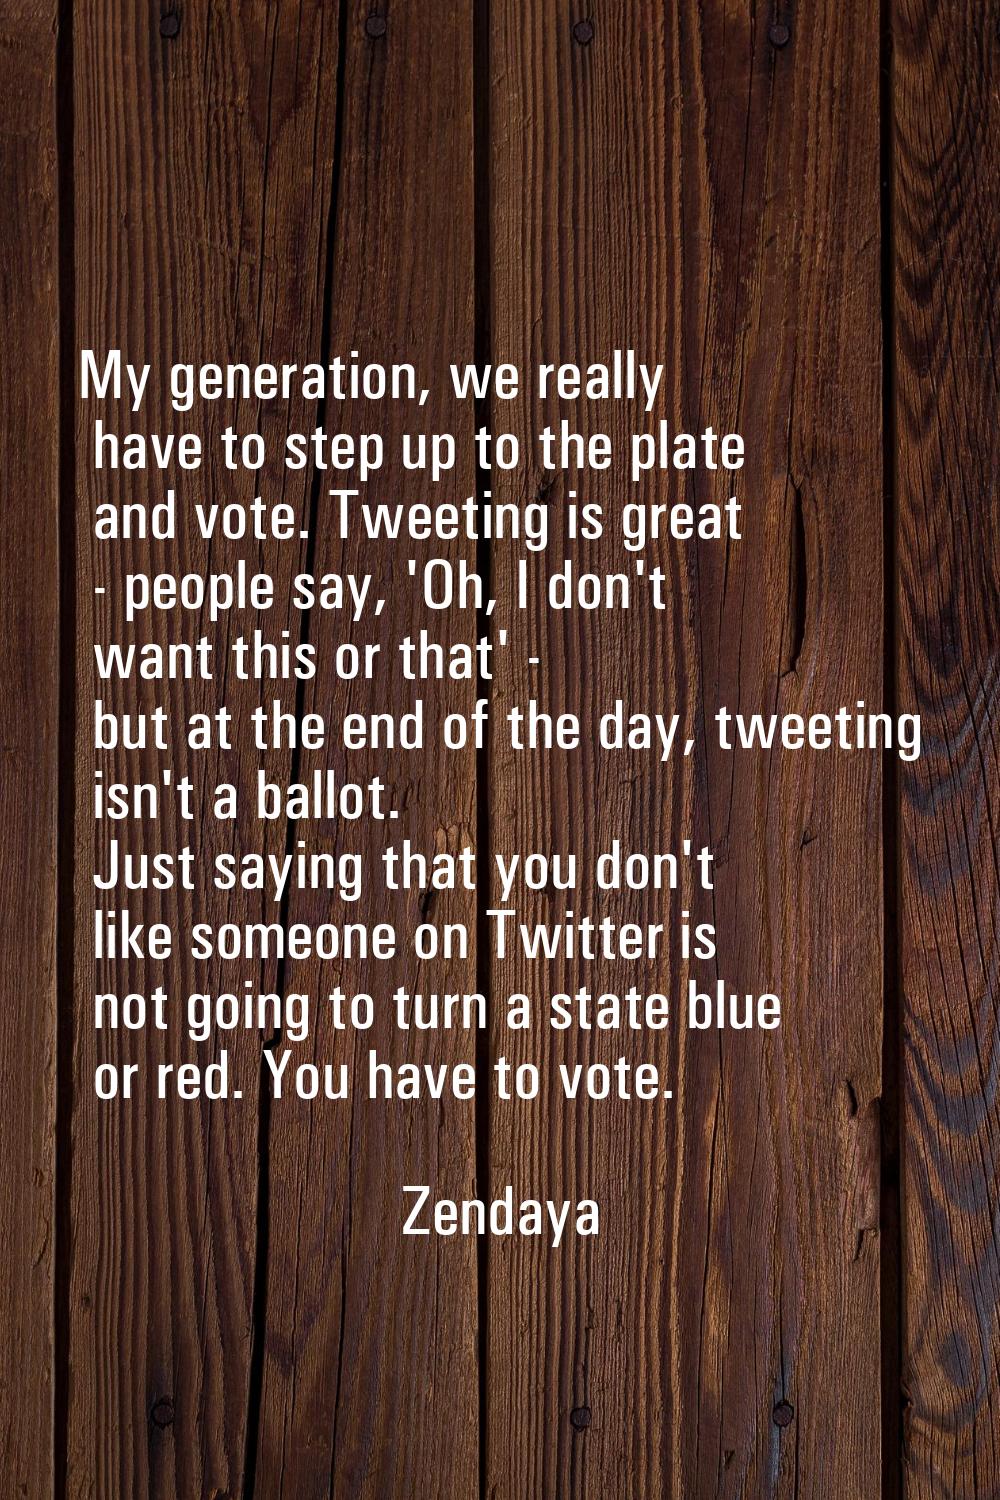 My generation, we really have to step up to the plate and vote. Tweeting is great - people say, 'Oh